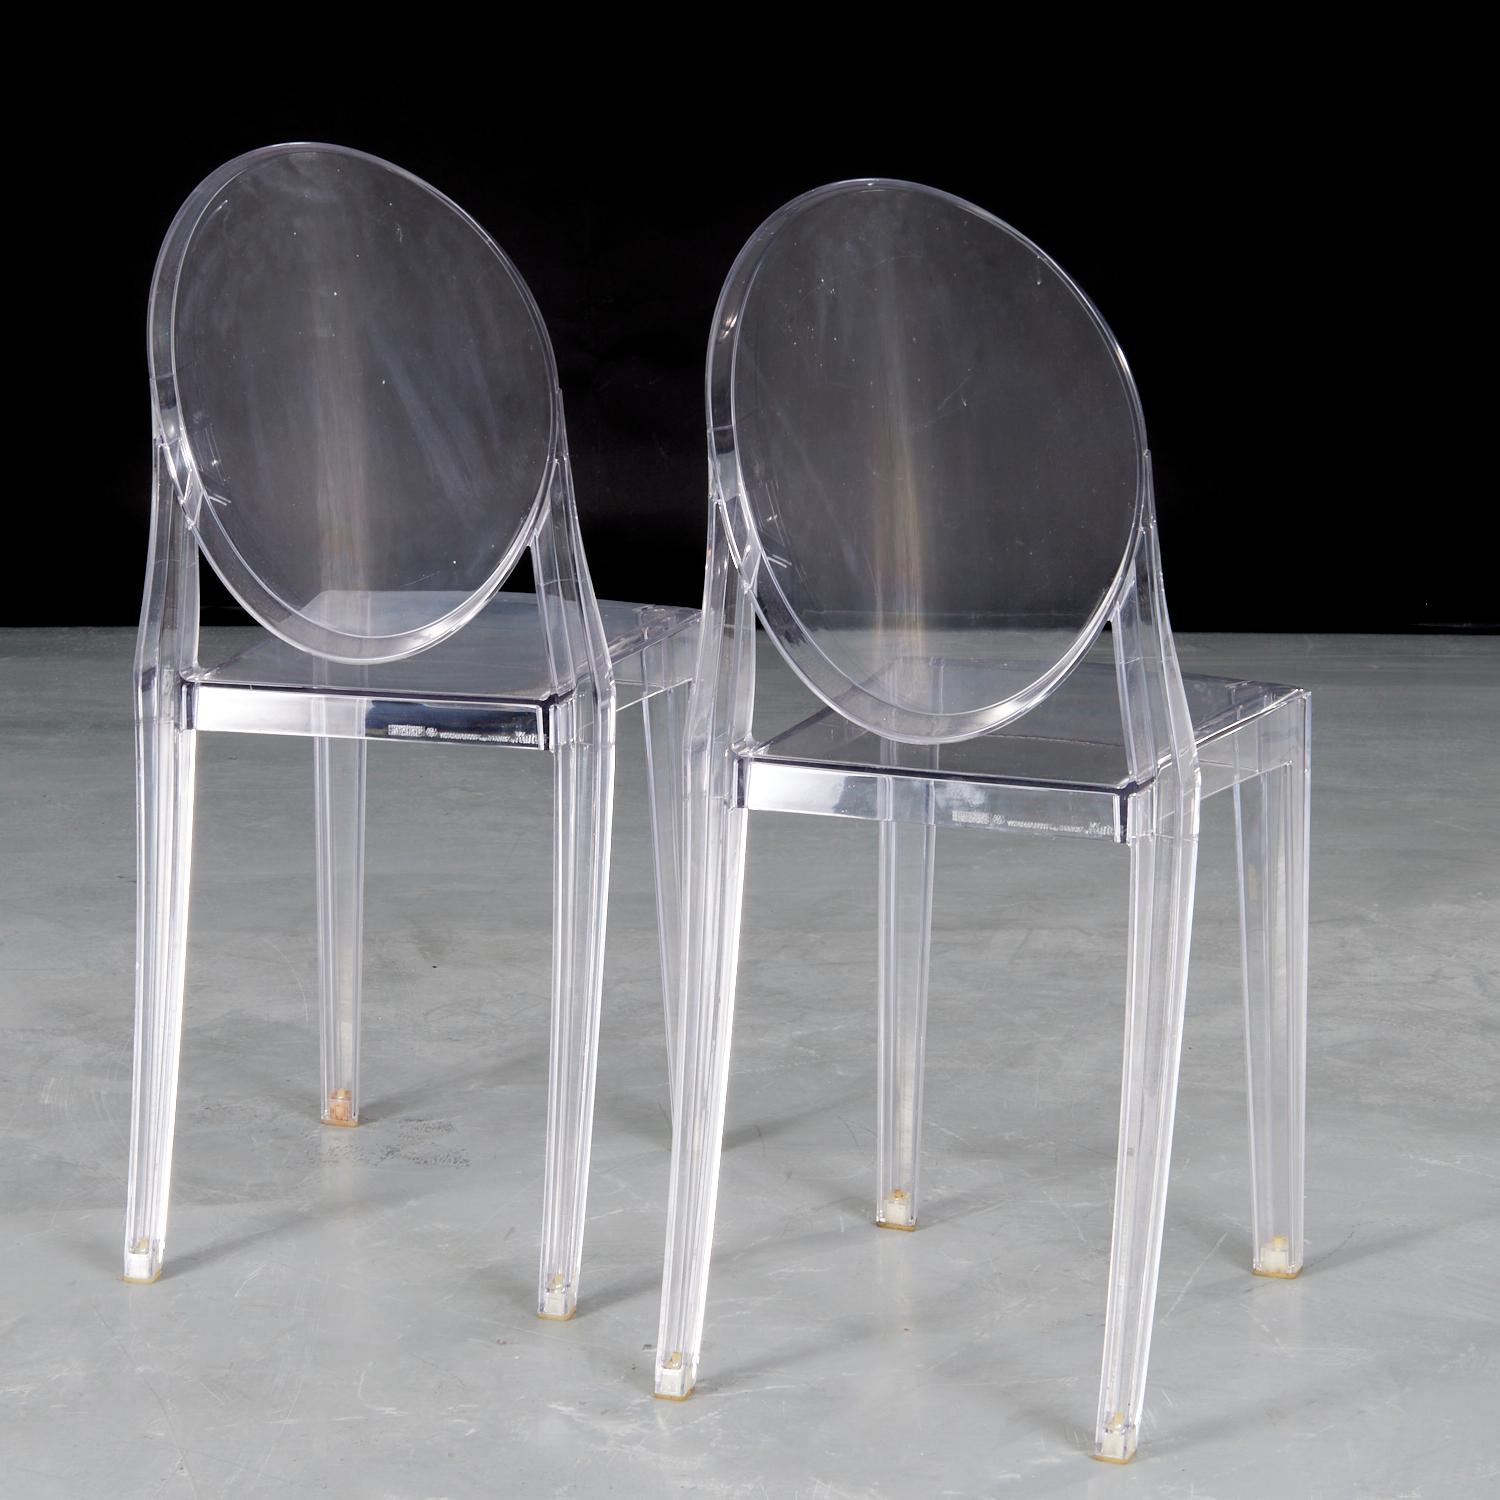 Italian Starck for Kartell - A Pair of Transparent Victoria Ghost Chairs For Sale